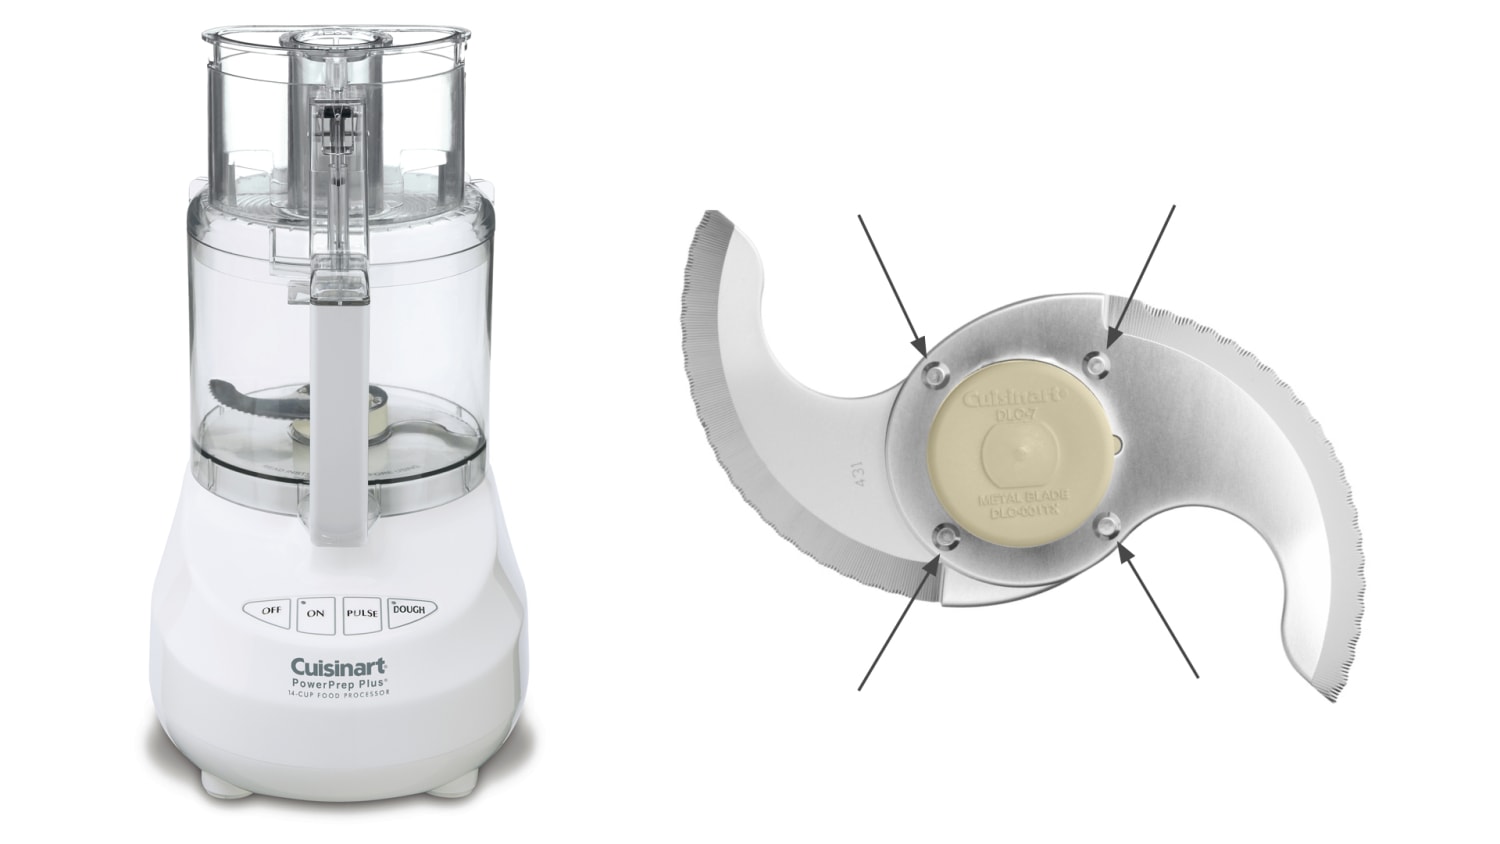 Cuisinart recalls 8 million food processors after reports of blade breaking  off